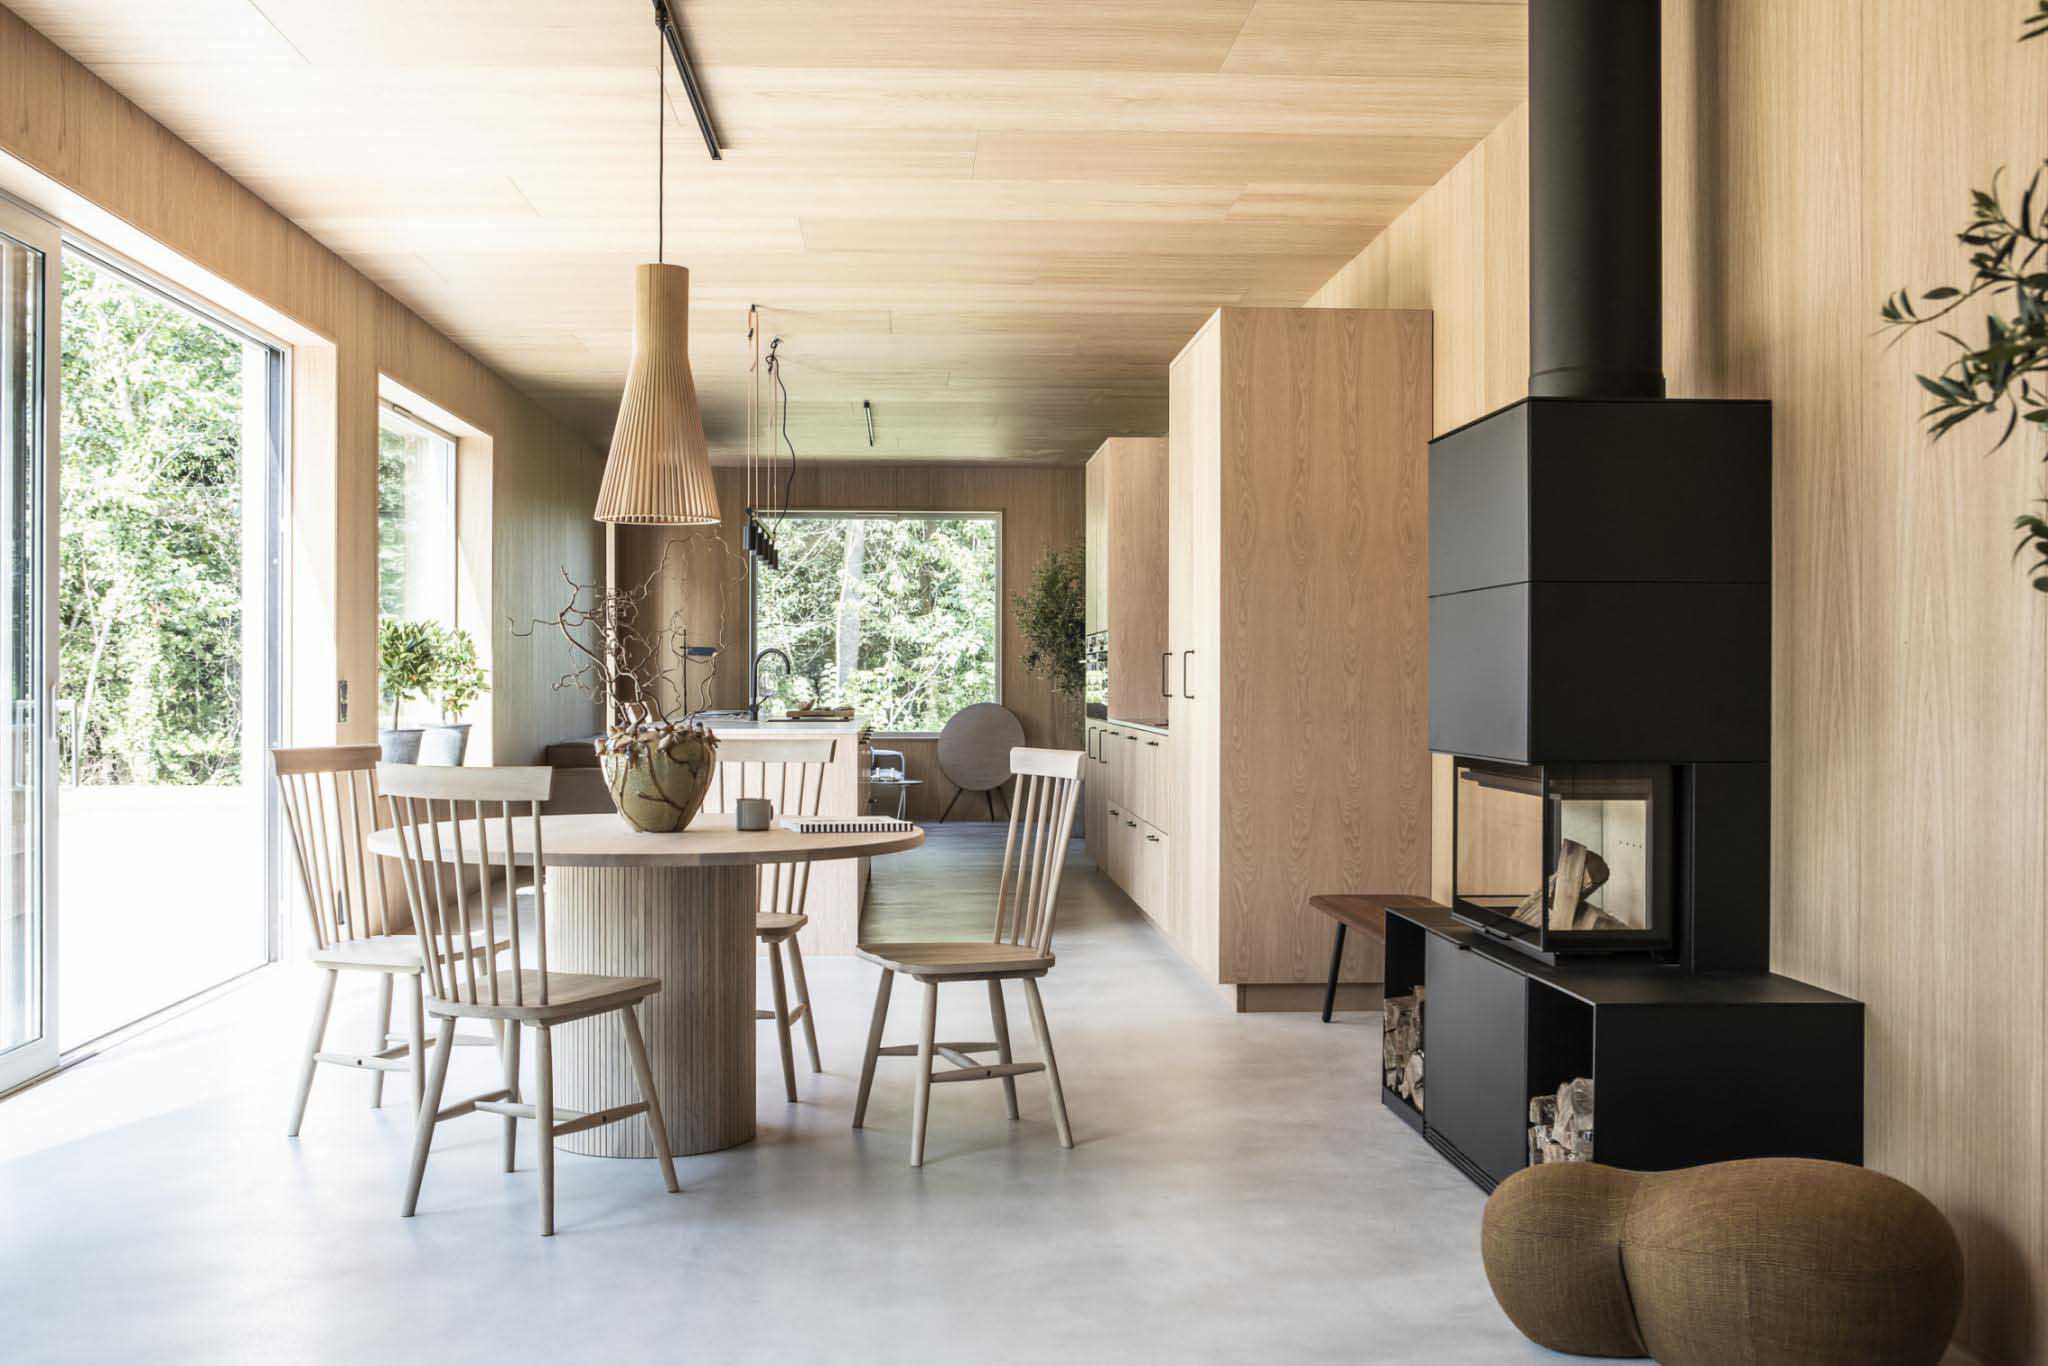 Home tour - a stunning new-build in Skåne | These Four Walls blog